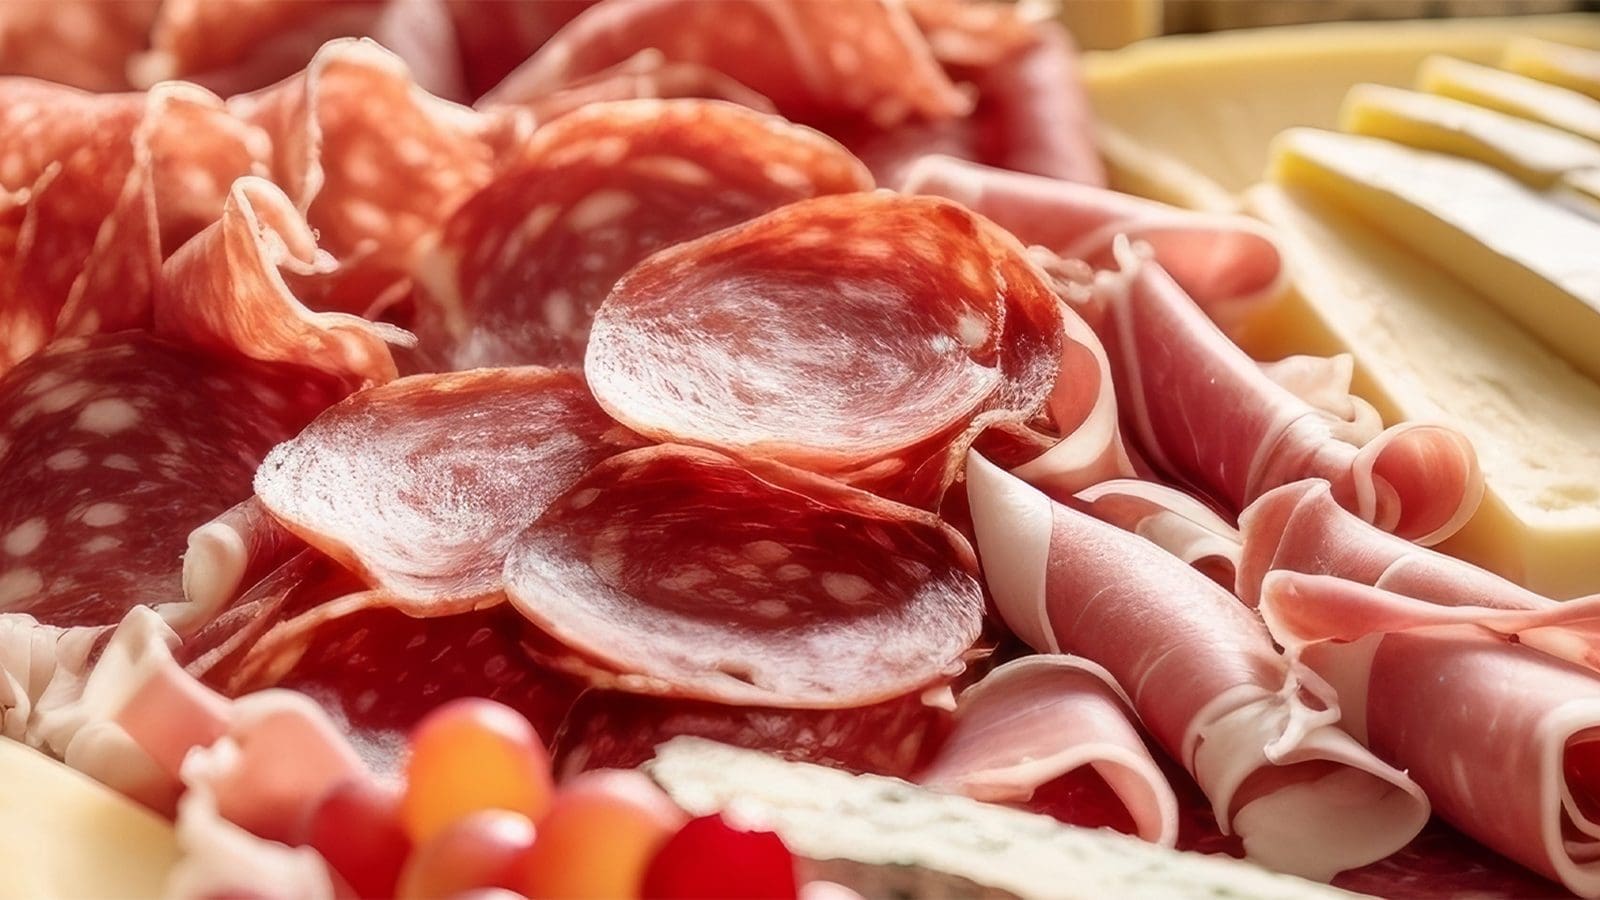 EU implements stricter limits on nitrites, nitrates in food additives to enhance consumer safety